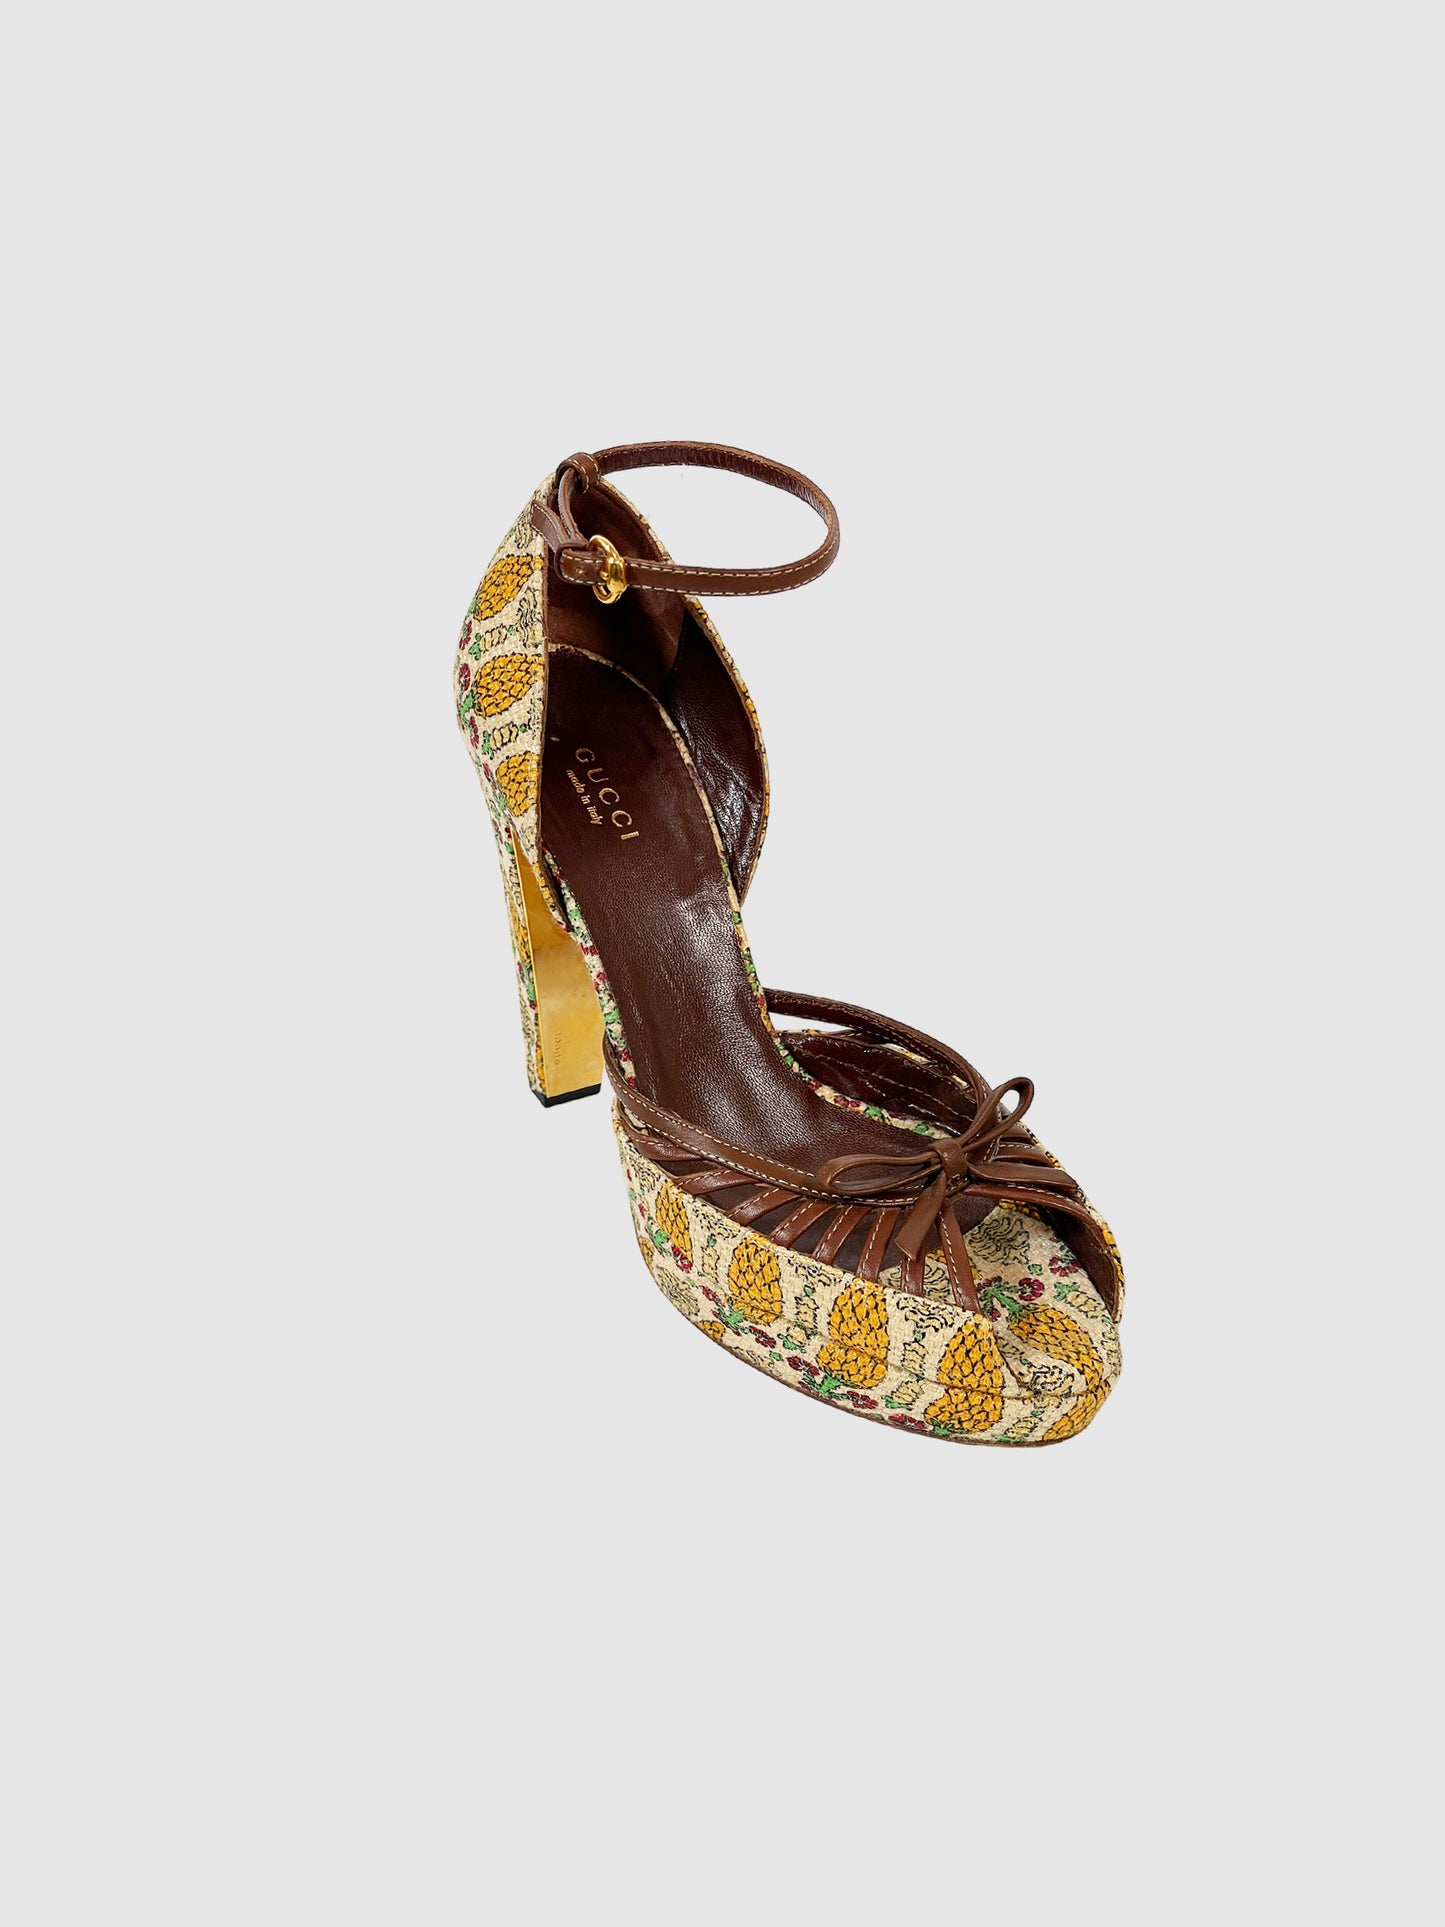 Gucci Printed Sandals - Size 37.5